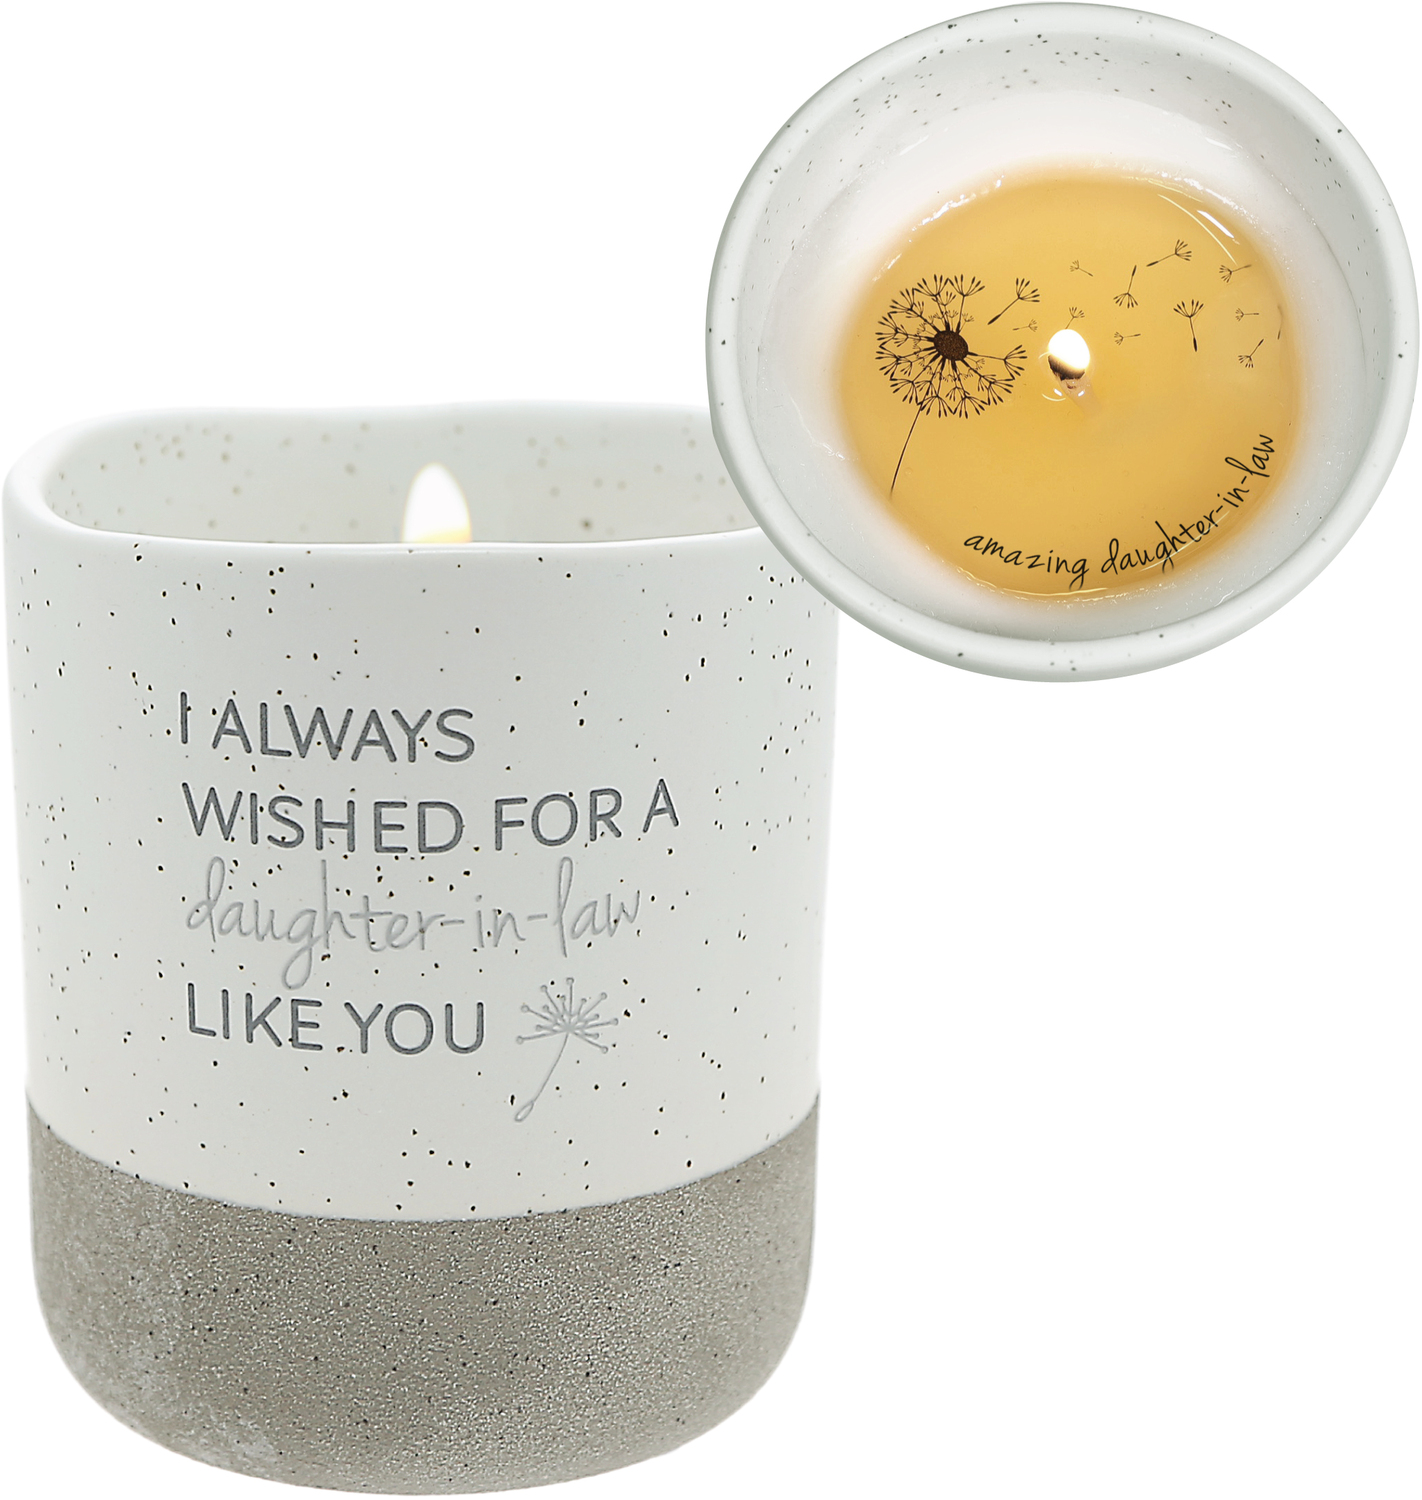 Daughter-In-Law Like You by I Always Wished - Daughter-In-Law Like You - 10 oz - 100% Soy Wax Reveal Candle
Scent: Tranquility